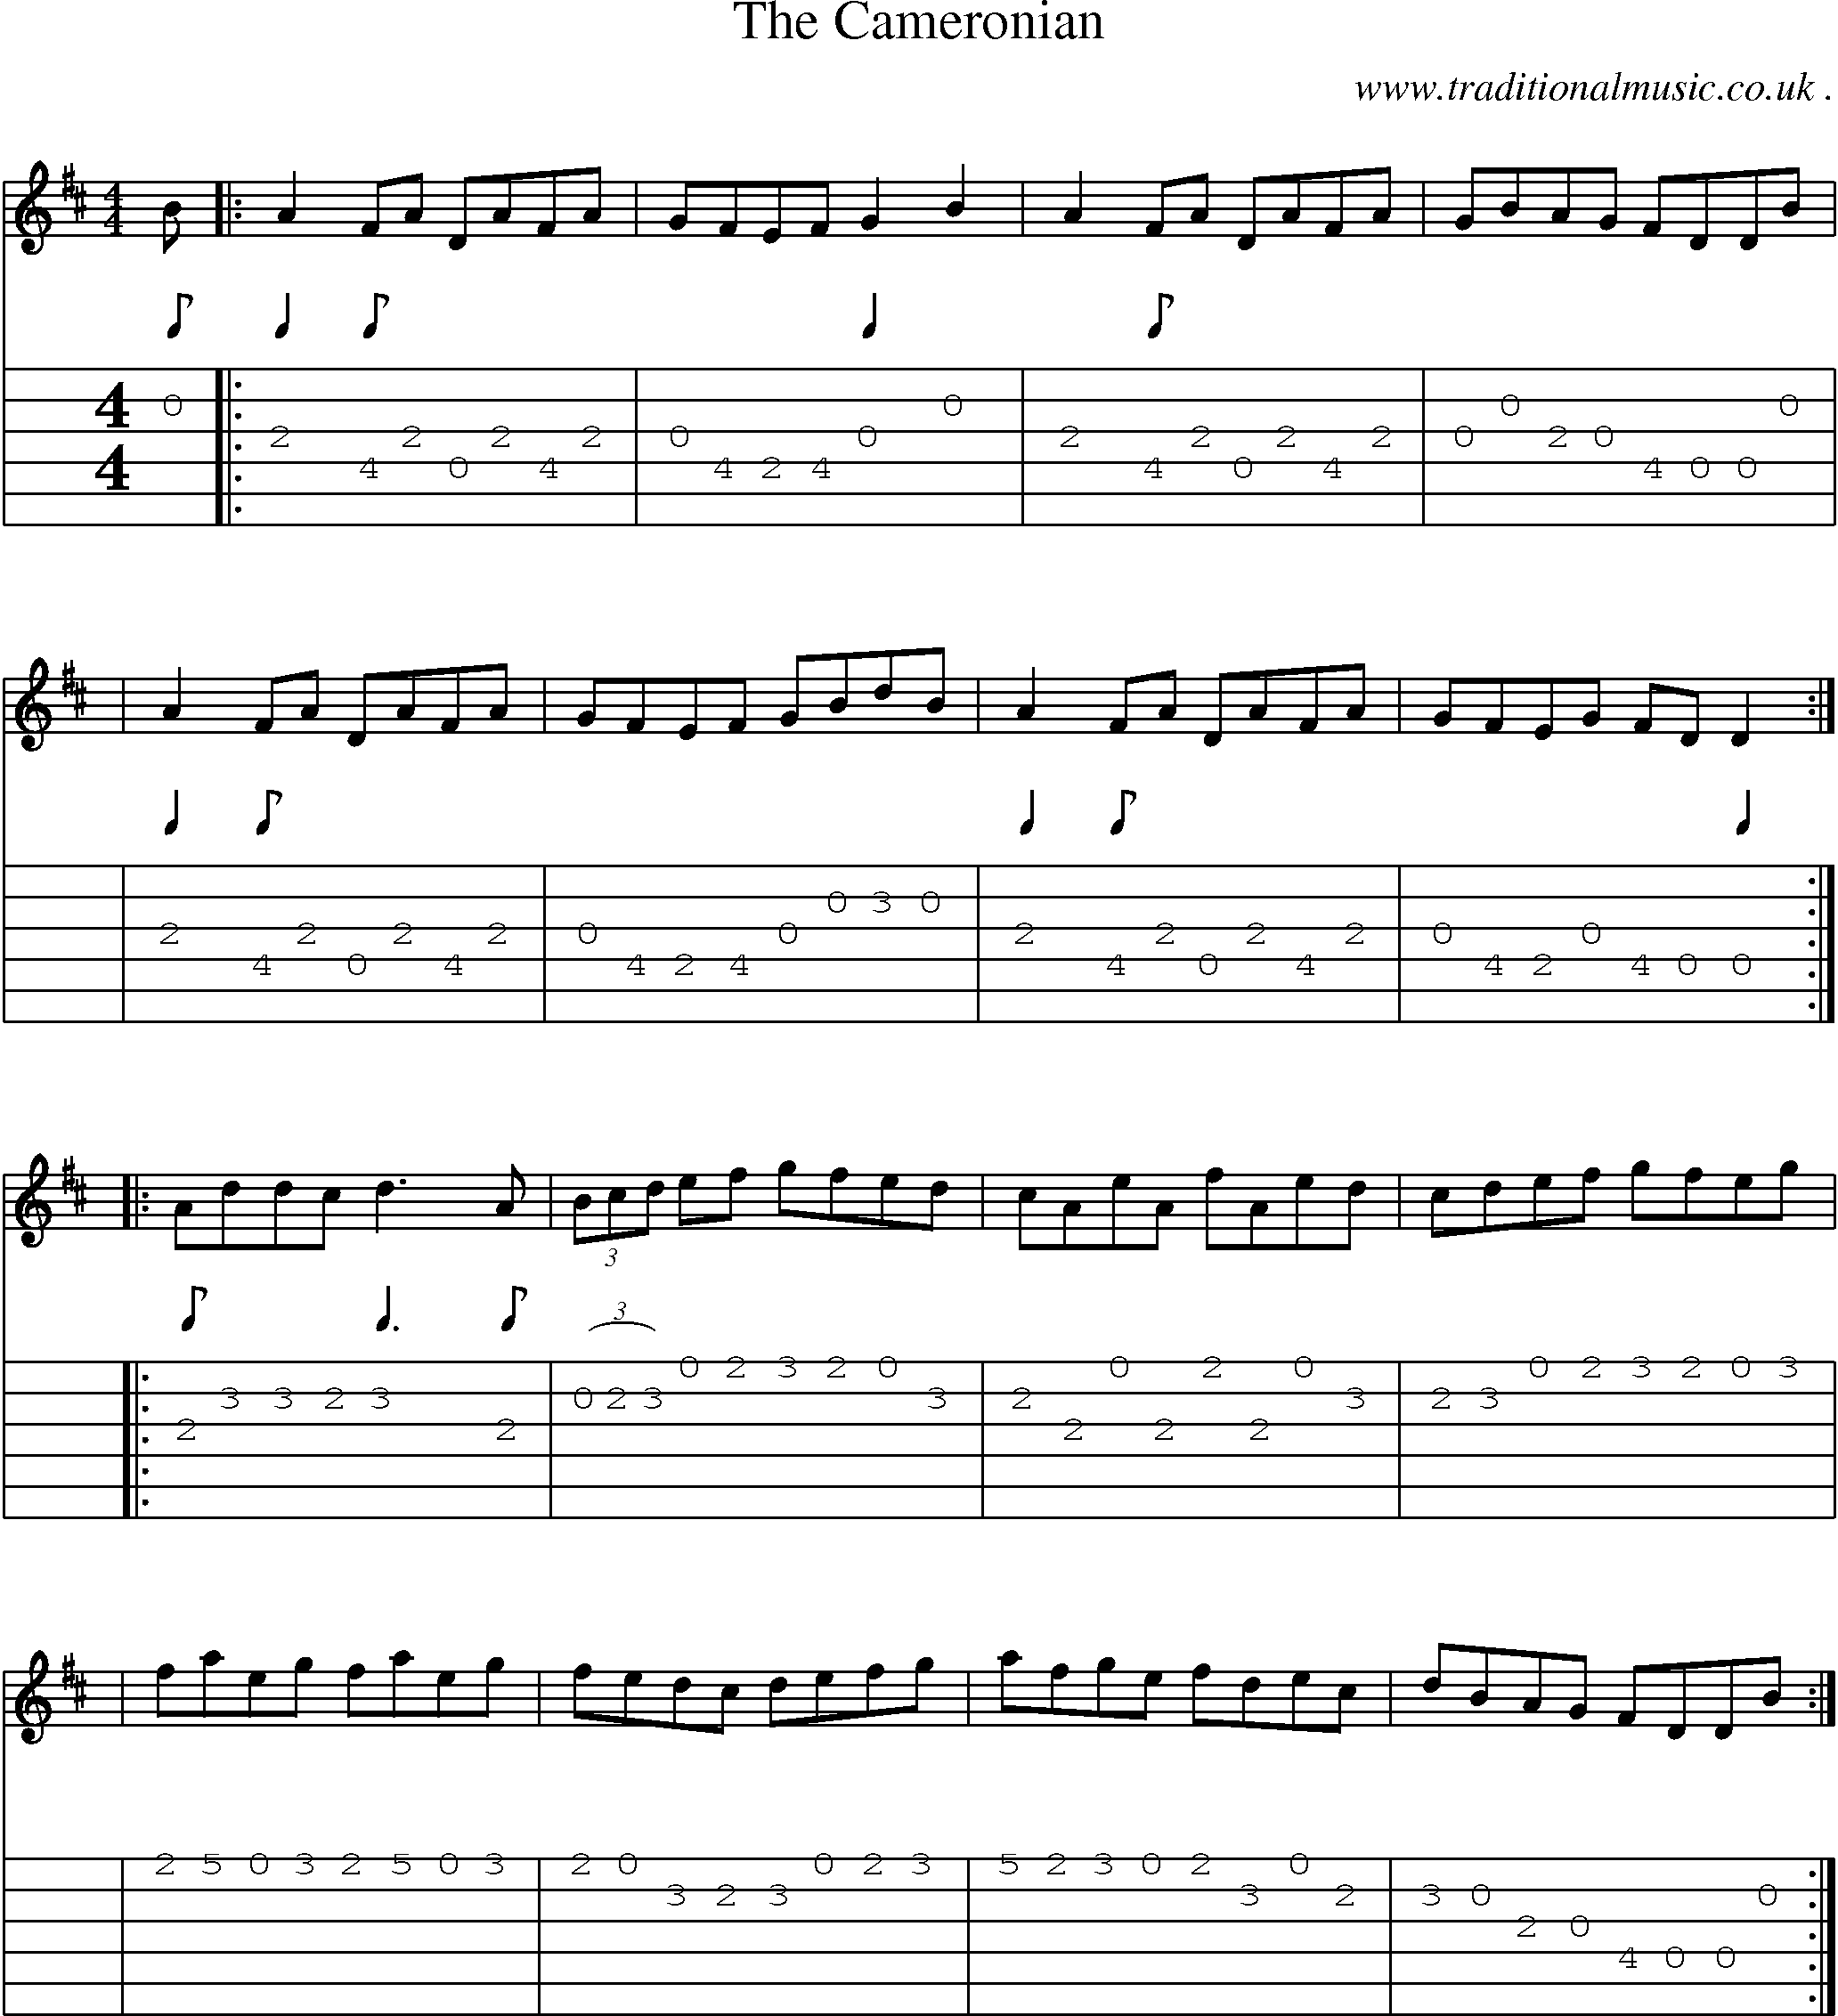 Sheet-Music and Guitar Tabs for The Cameronian